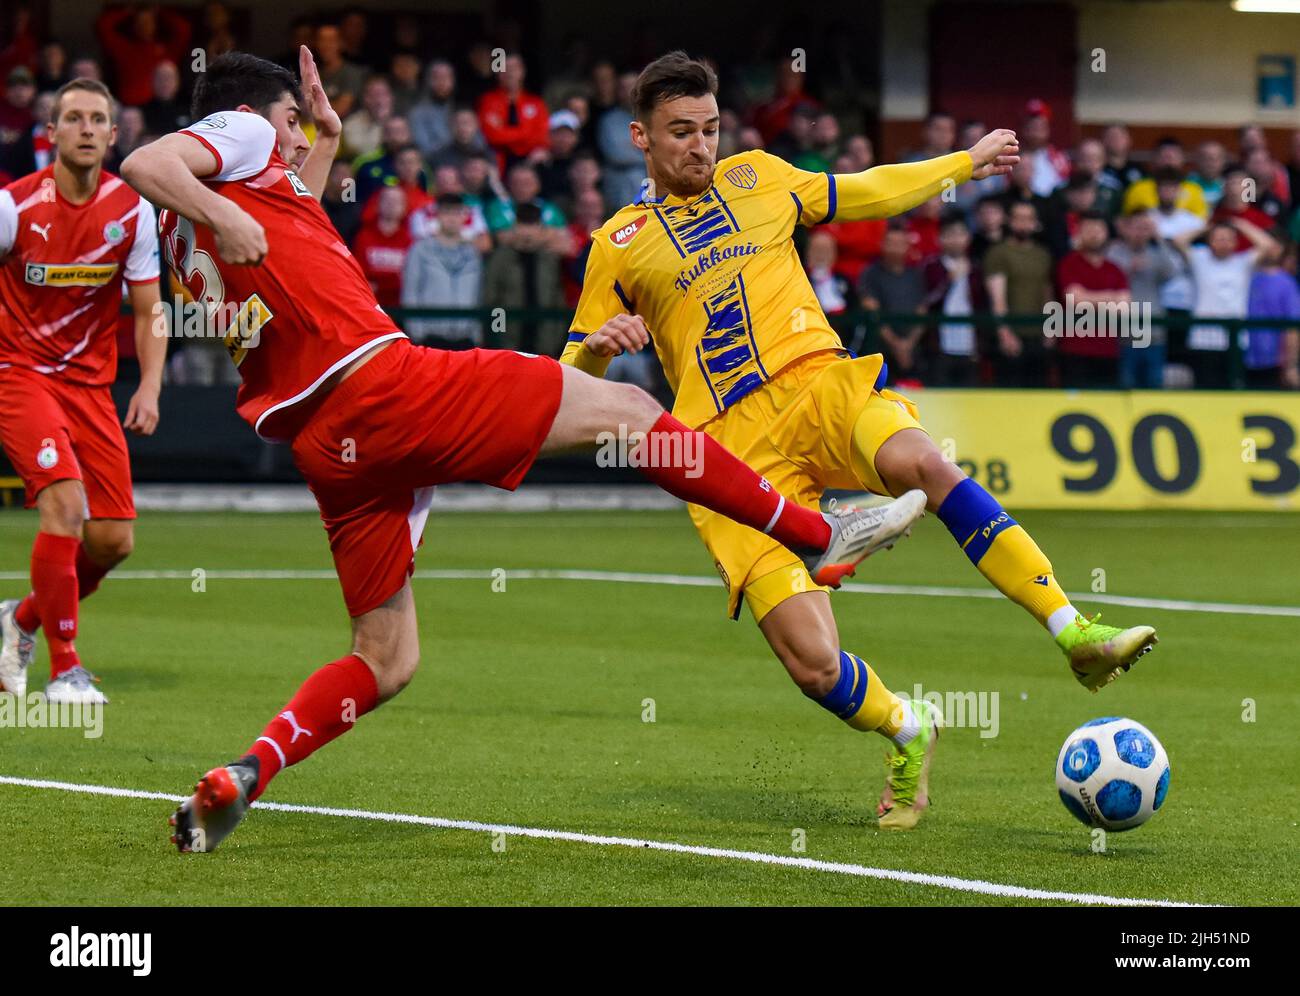 Kris Lowe in Aktion – Cliftonville vs DAC 1904 – UEFA Europa Conference League Stockfoto